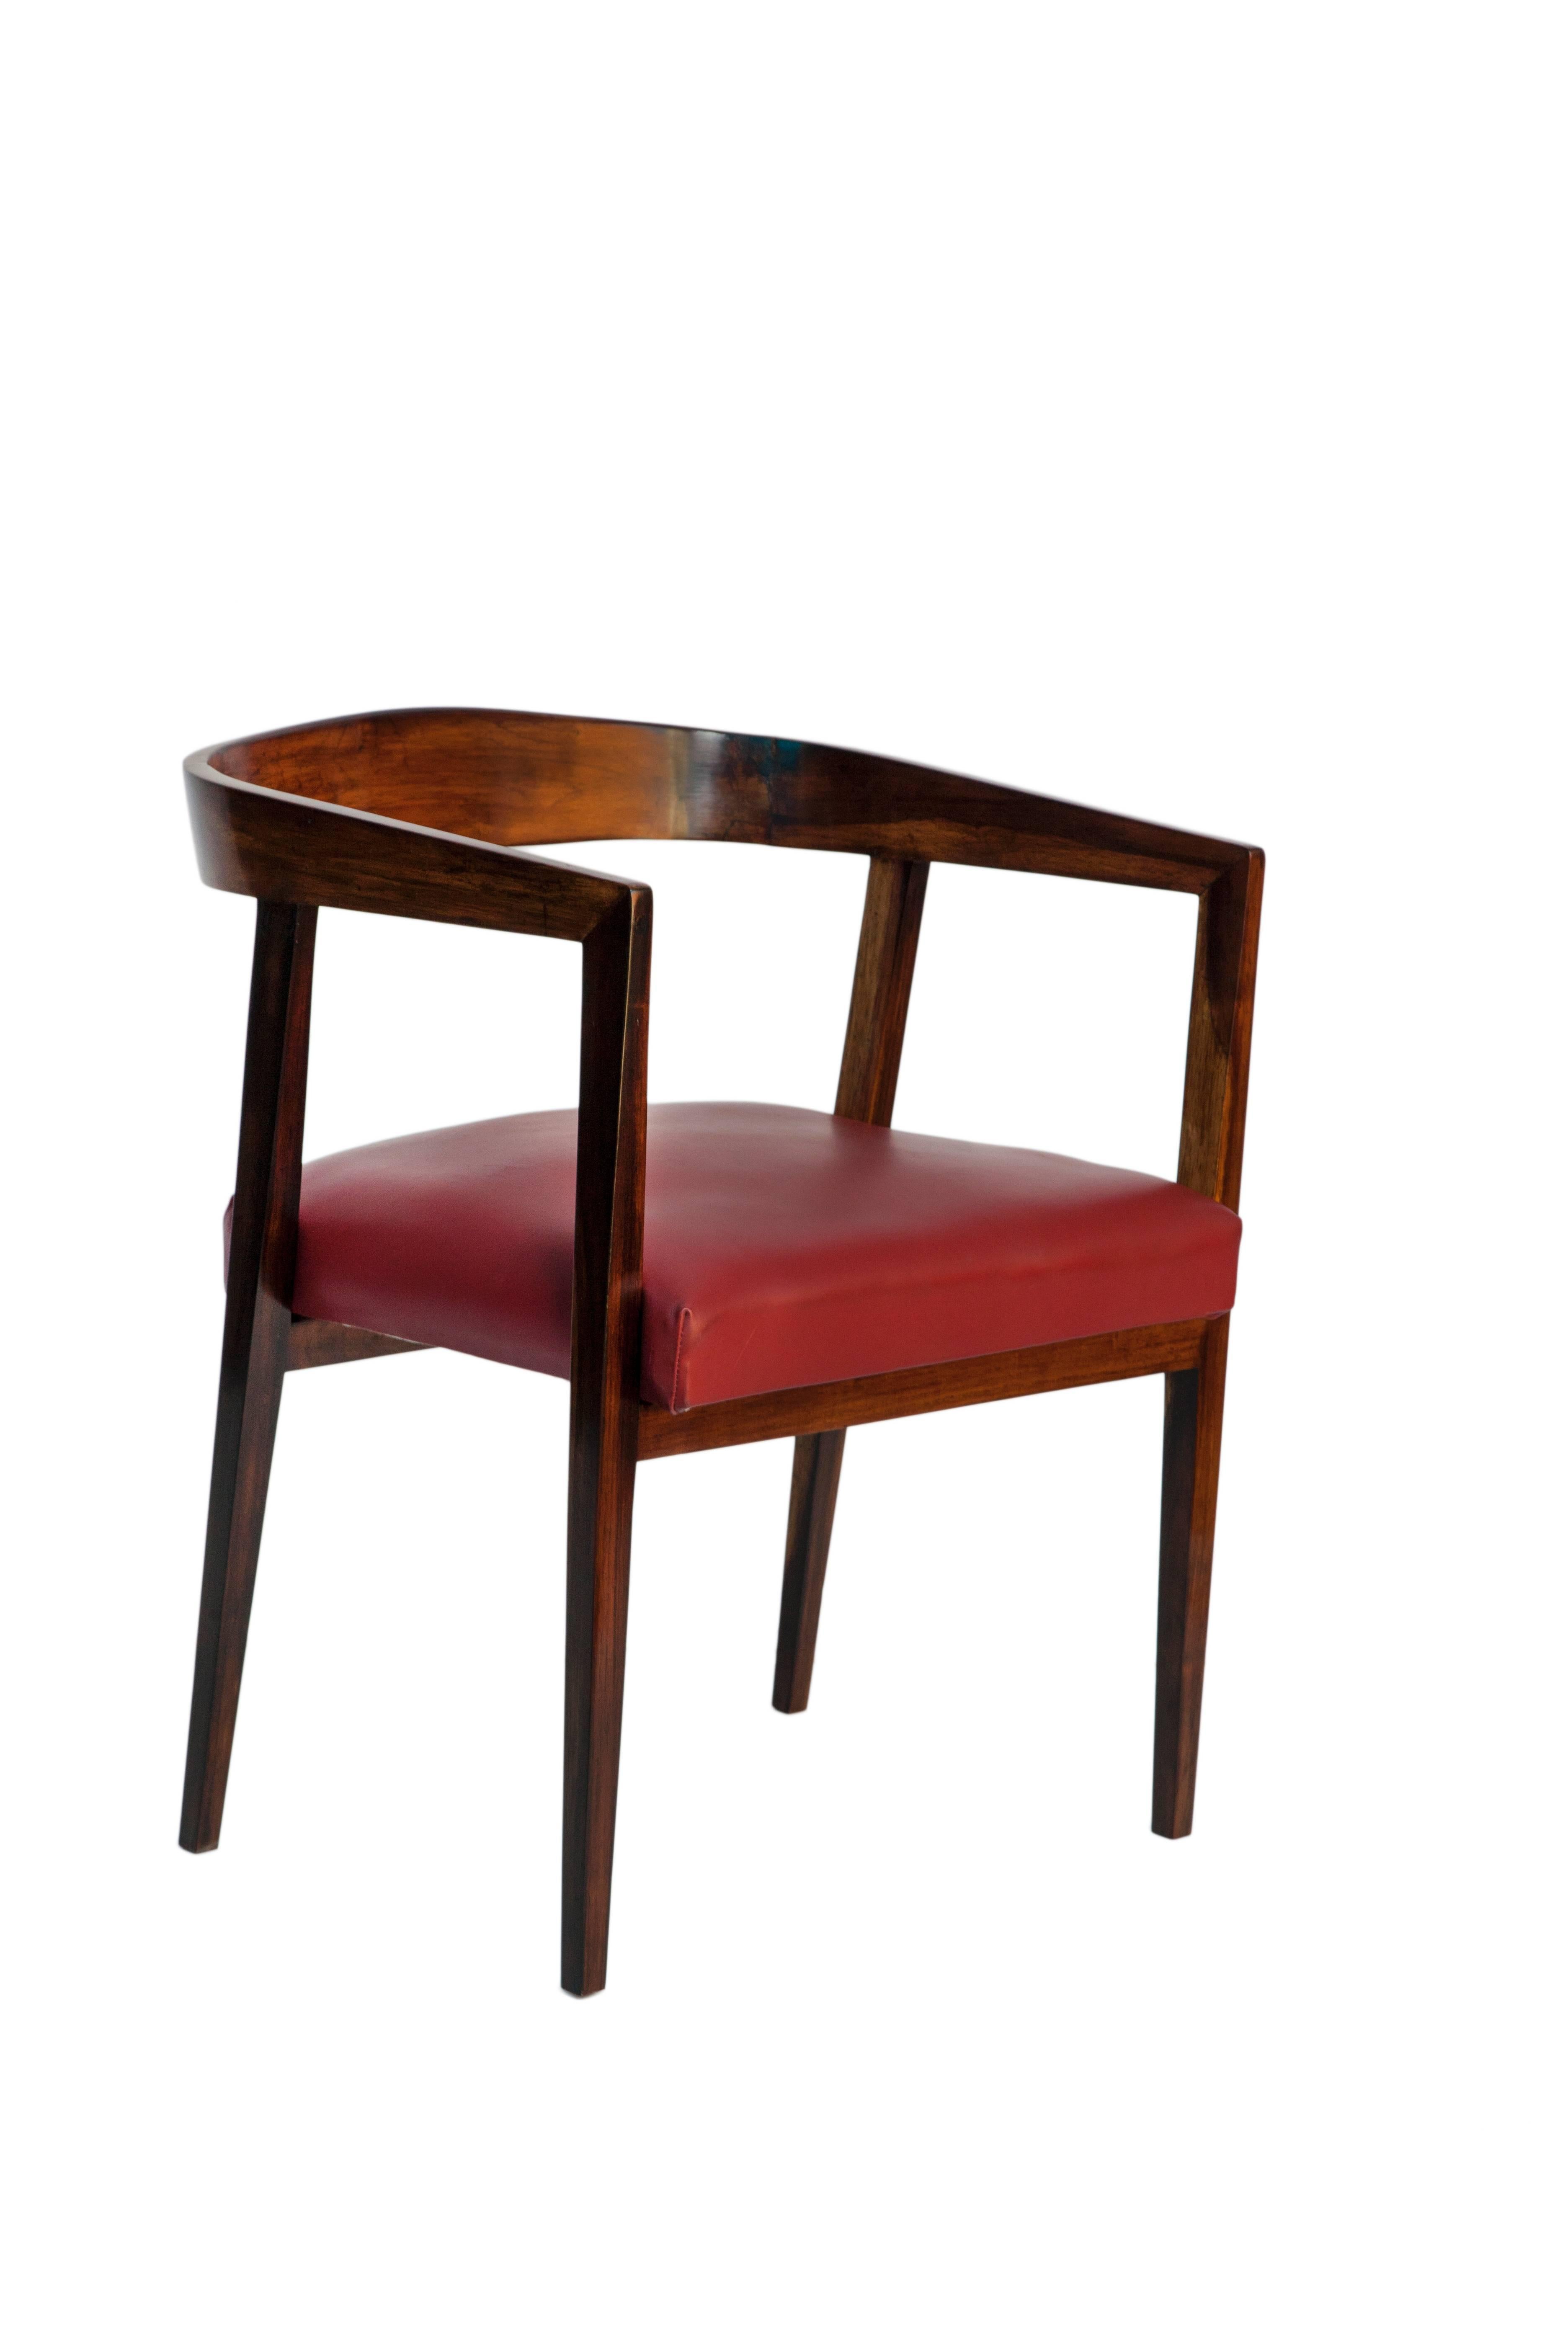 A set of four circa 1950s dining chairs designed by Joaquim Tenreiro, each in Brazilian jacaranda wood with curved back and arms, seats upholstered in red leather. Excellent vintage condition, seats recently reupholstered.